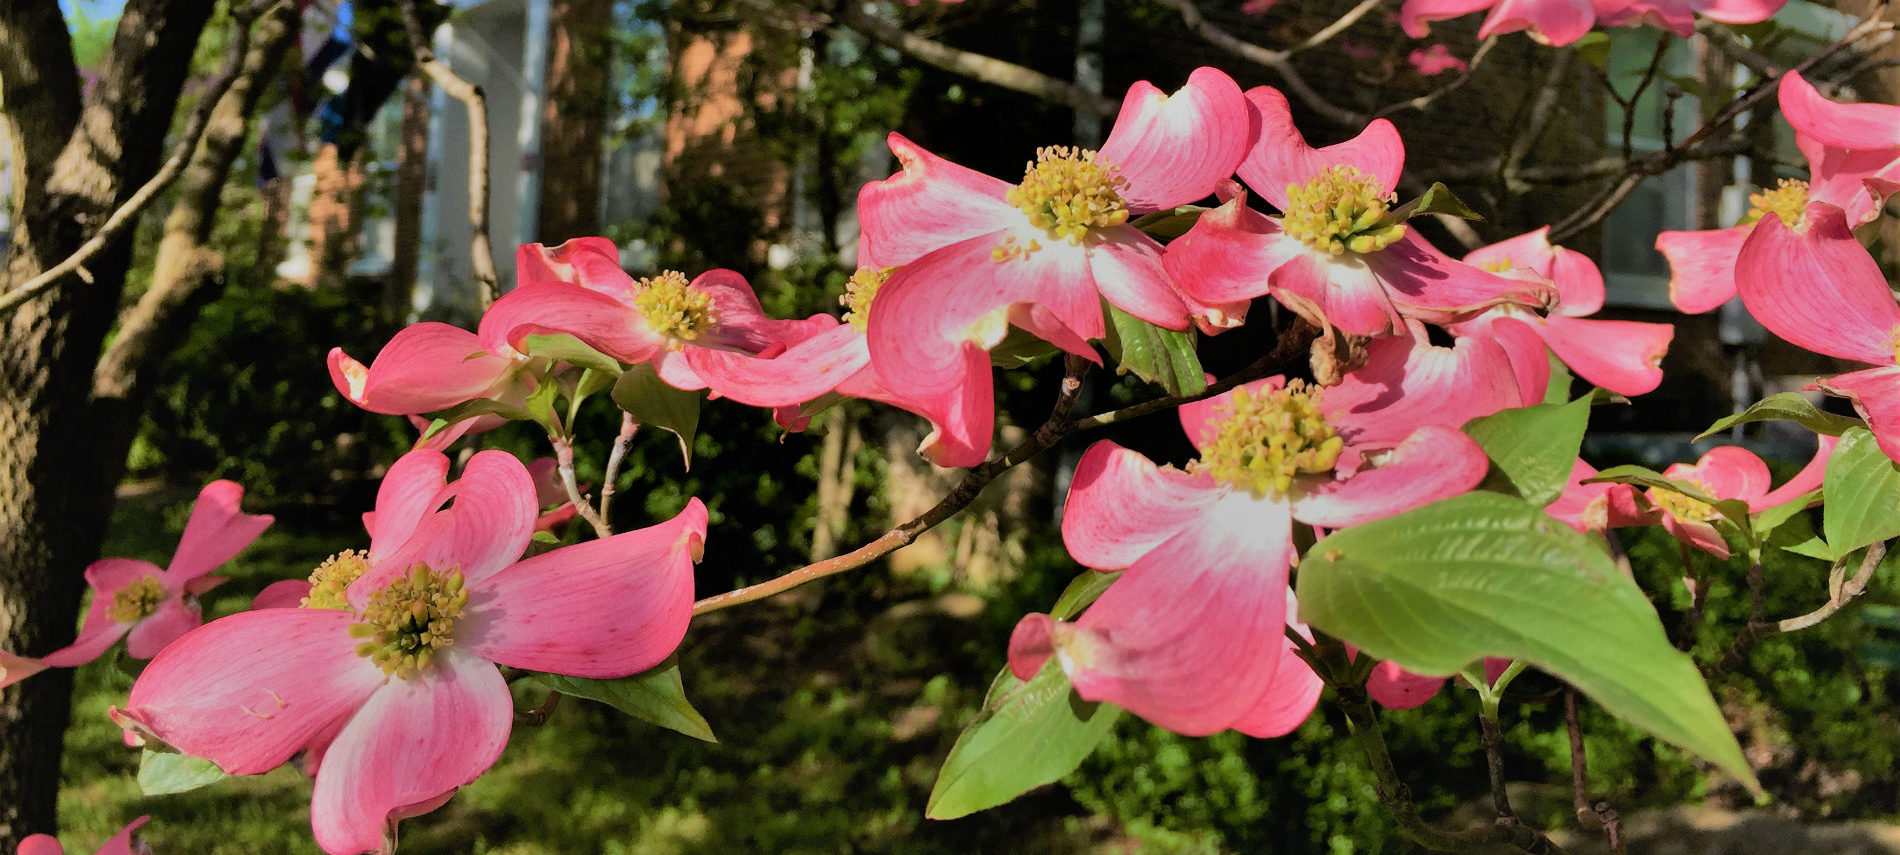 A beautiful photo of coral dogwood flowers with the B&B in the background